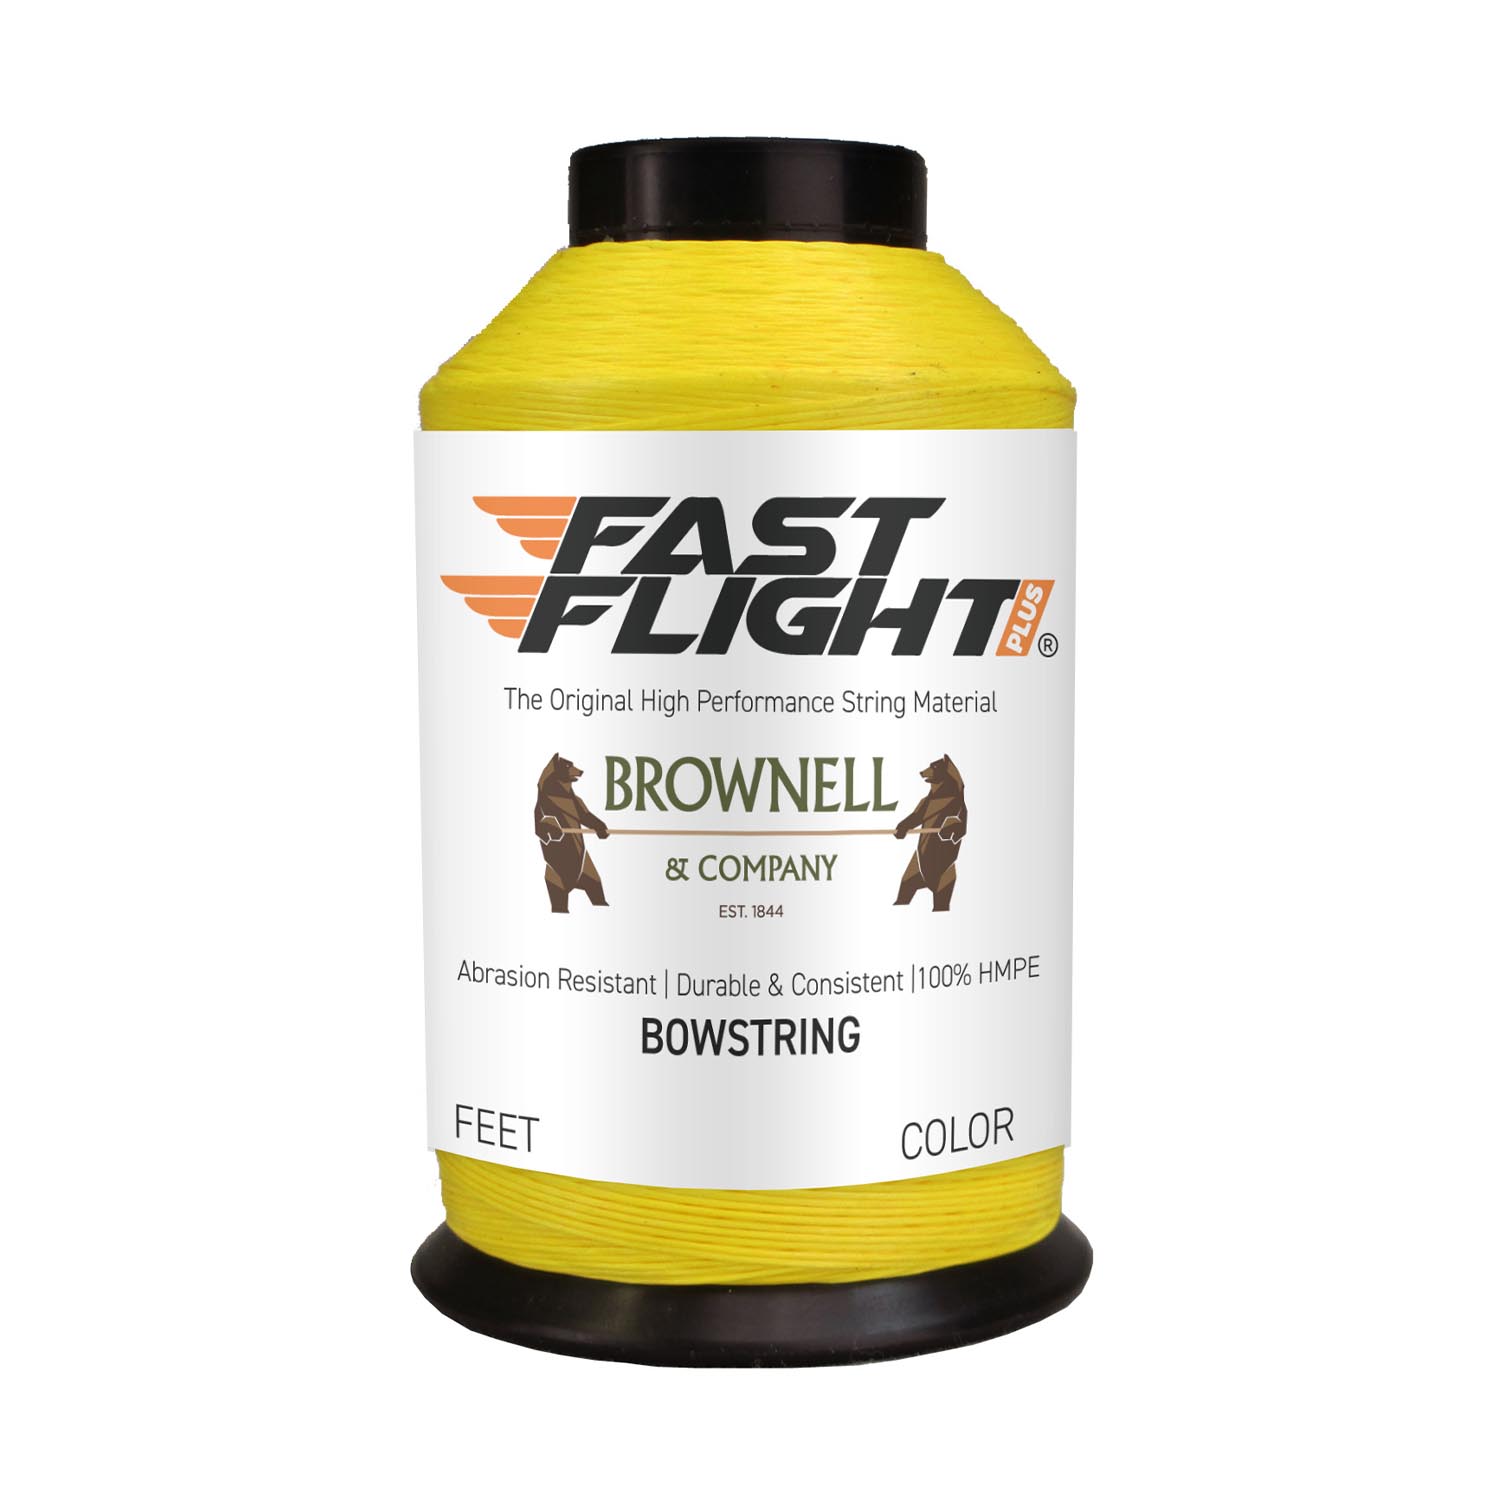  Buy Brownell Bowstring Material Fast Flight Plus 1/4  lbs online